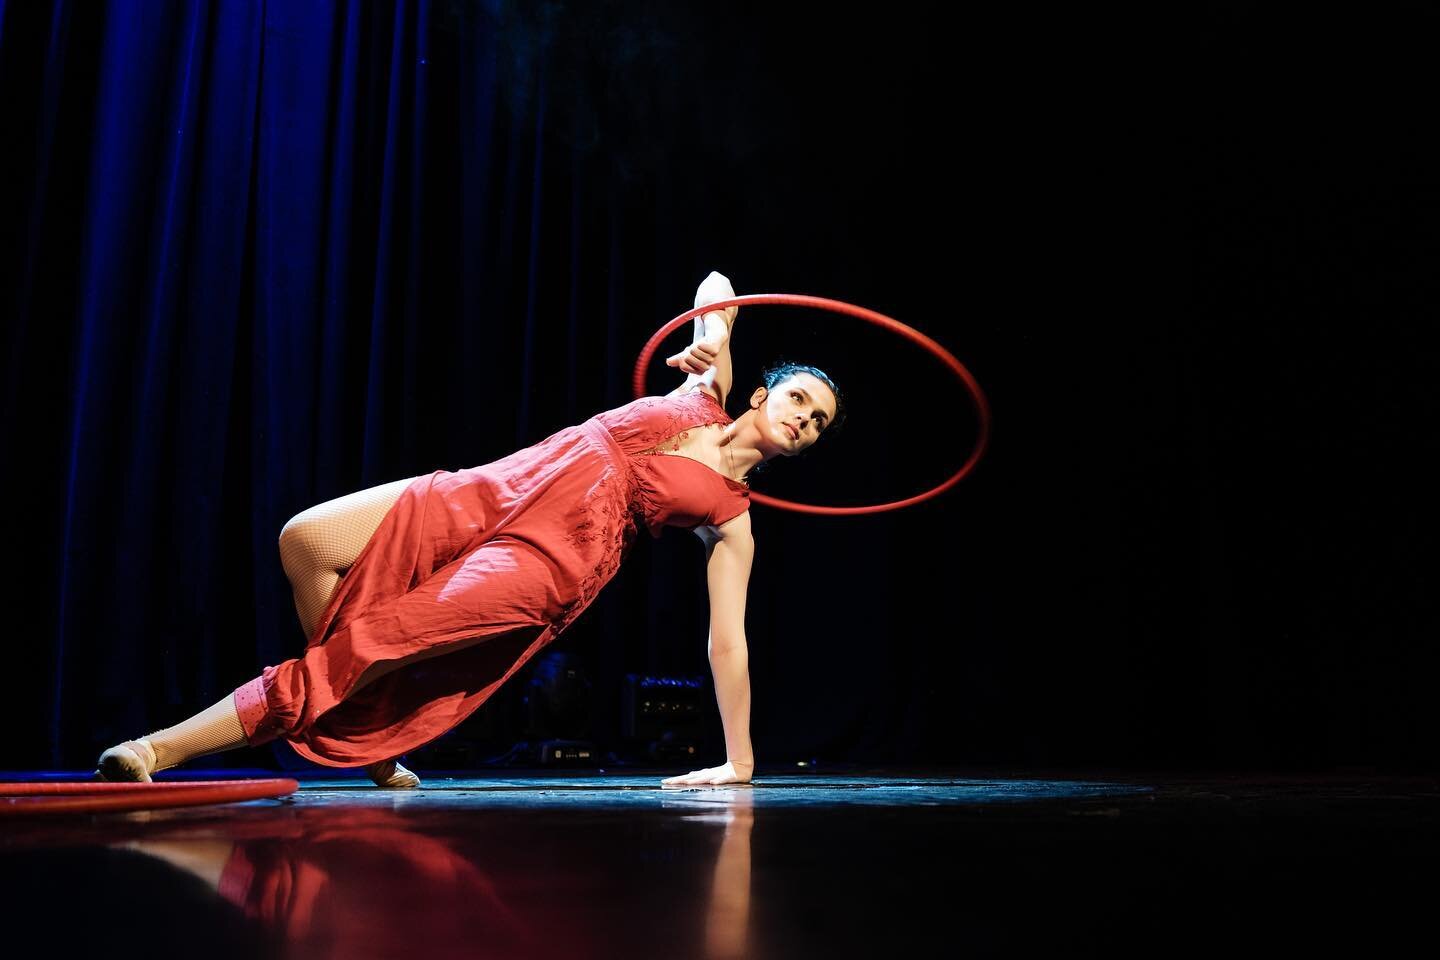 Can&rsquo;t believe how quickly these two weeks have gone by! This was my first time performing my hoop rolling act since February 2020 and I am so thankful for the opportunity to bring it back to the stage. Thank you to the @newcomershow and @krysta